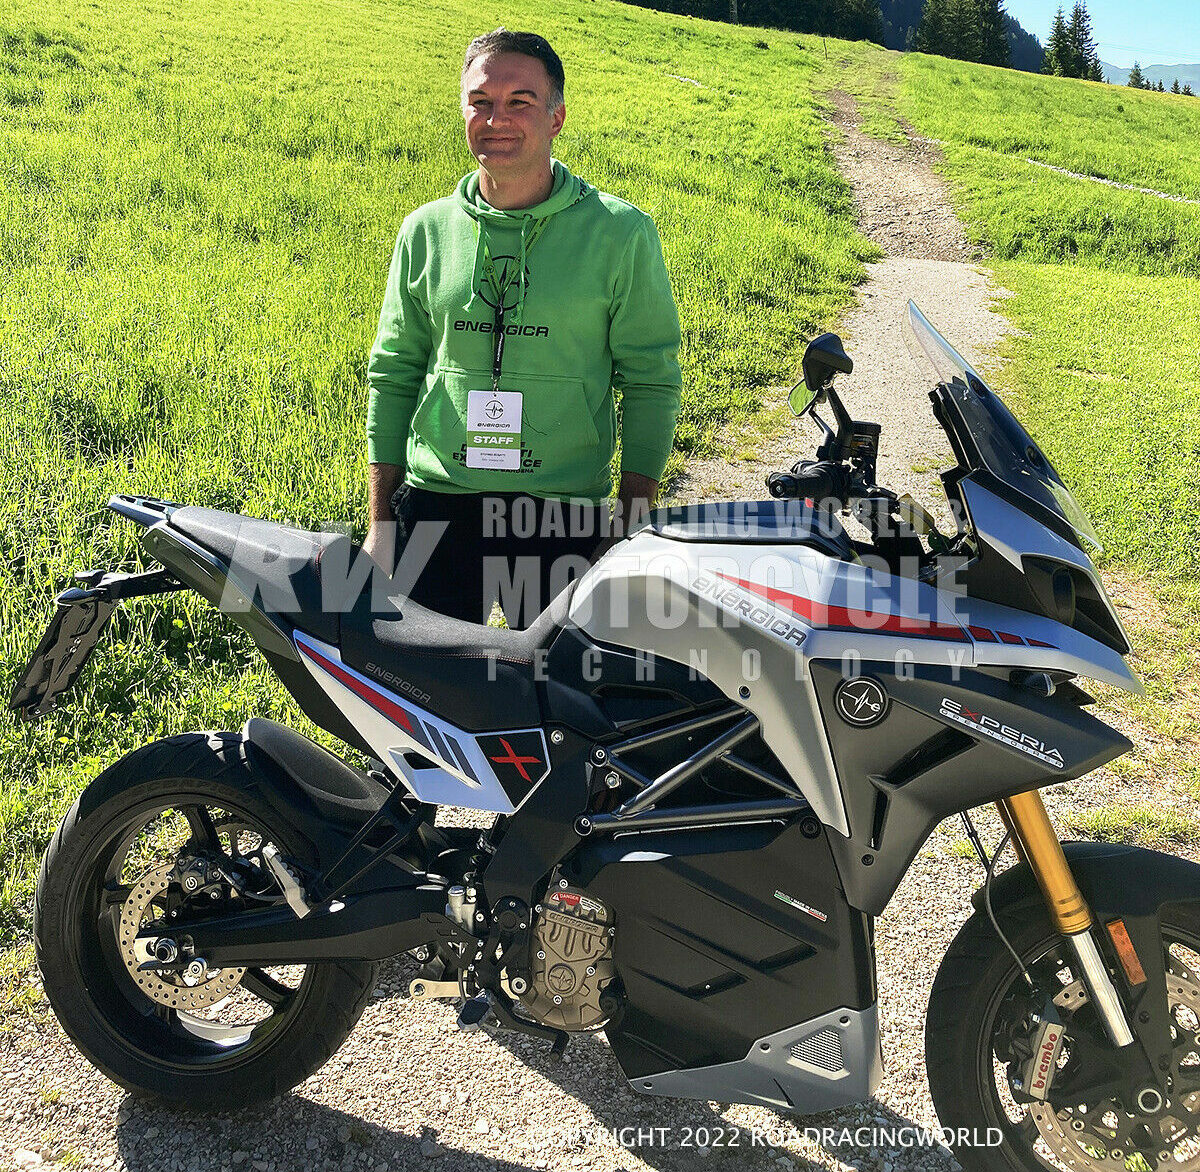 Stefano Benatti, CEO of Energica Motor Company, USA, with the company's new Experia Green Tourer. Benatti used his personal connection with enthusiastic customers to provide feedback to the factory in Italy, which made his job significantly more interesting. Photo by Michael Gougis.